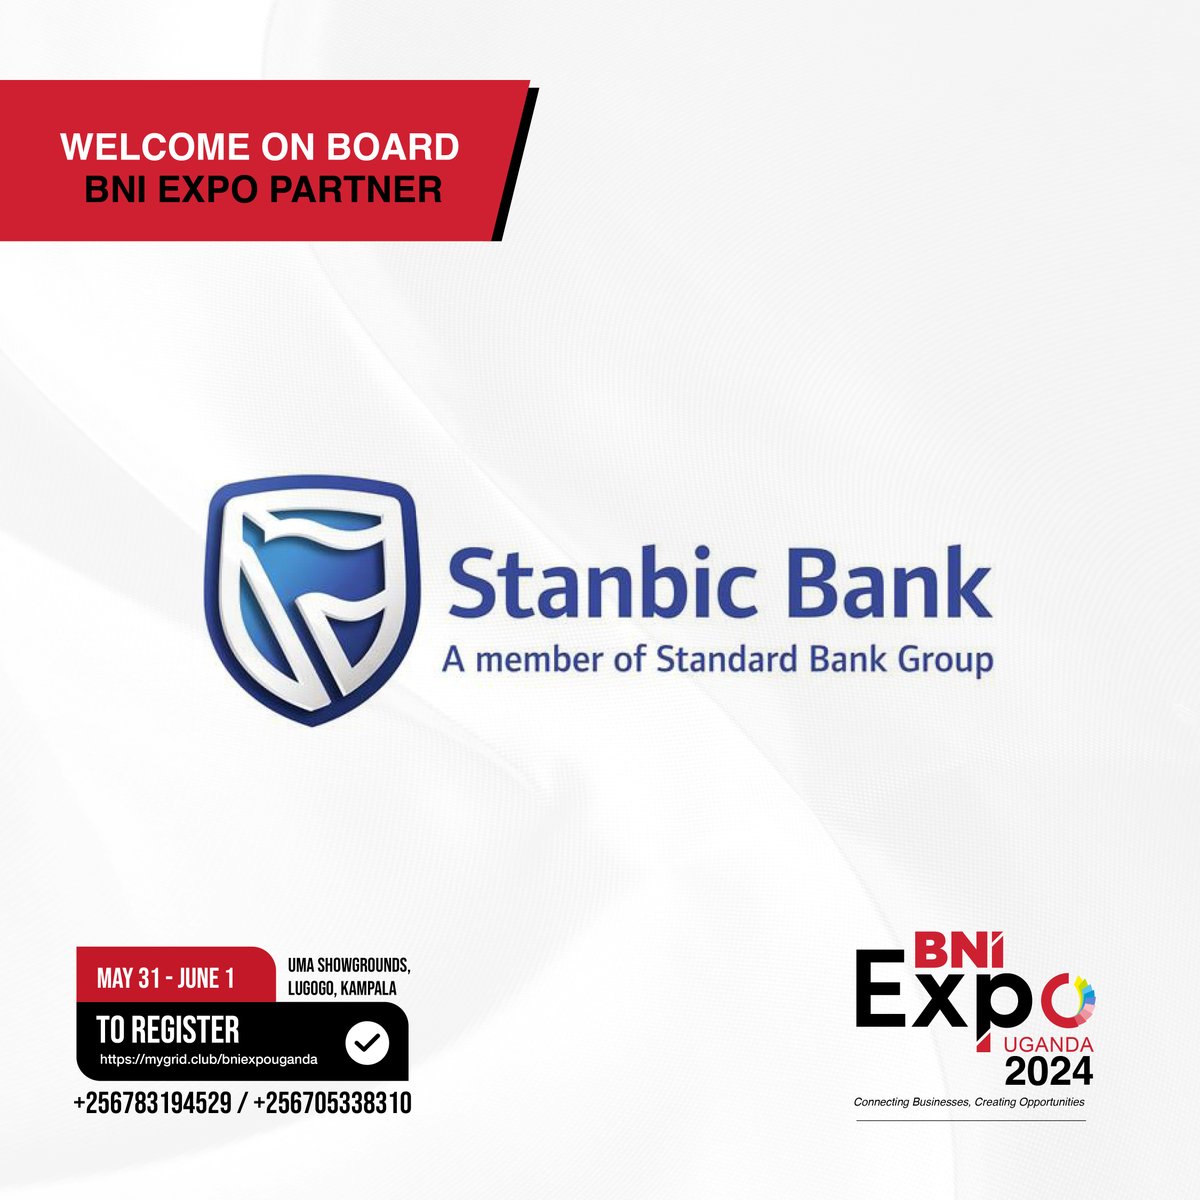 Join us in welcoming aboard @stanbicug app as an official BNI Expo Partner. You can secure your slot at just UGX 10,00/= Register to attend the 2 day event at the link below; zurl.co/ay13 #BNIExpo2024